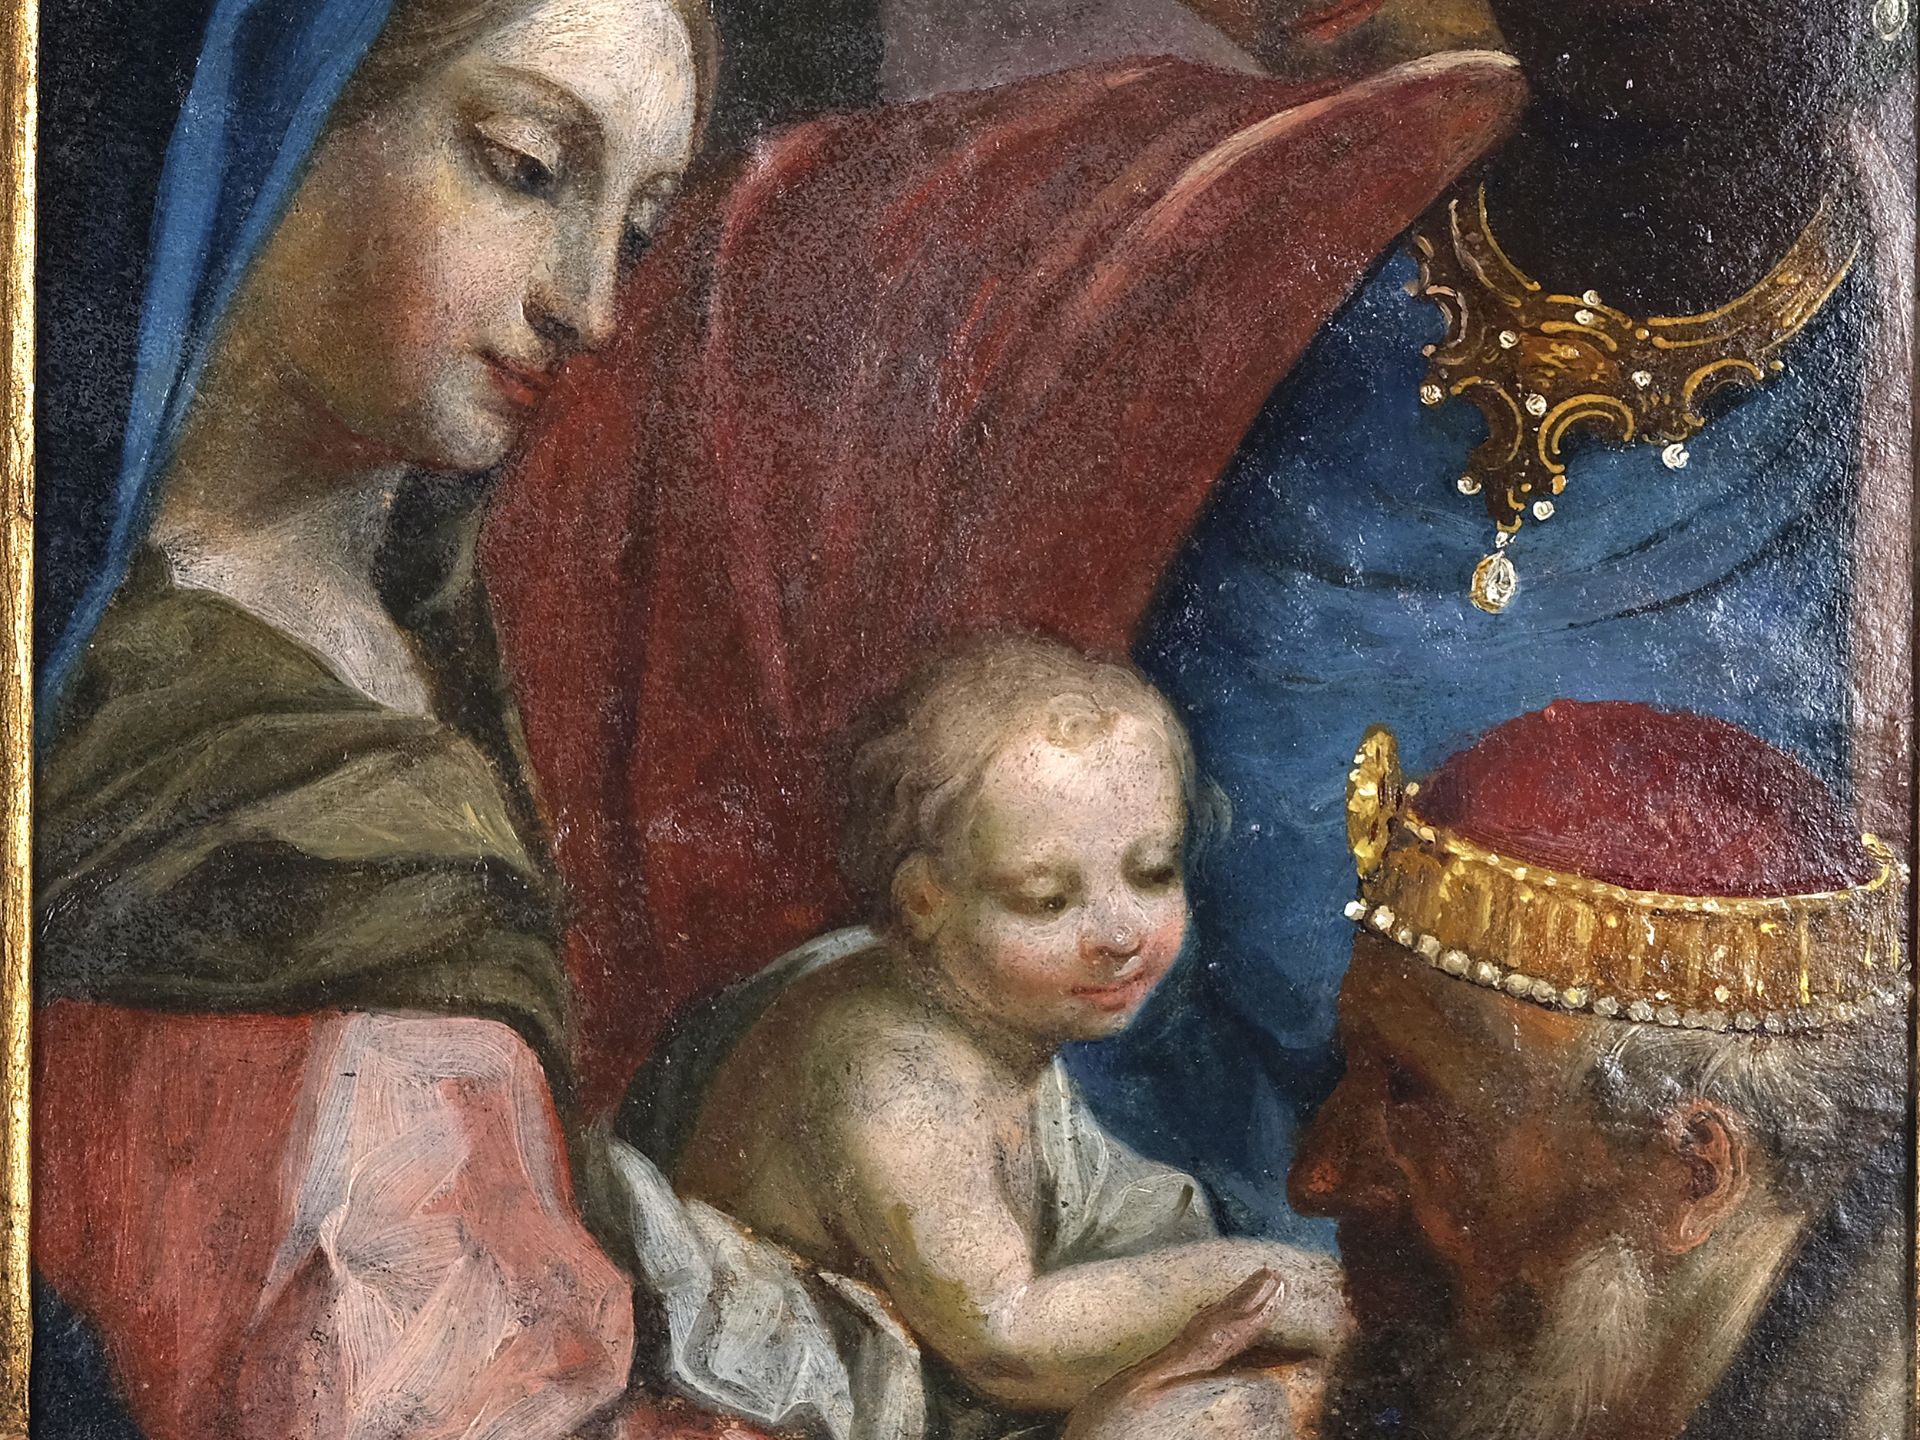 Adoration of the Magi, Southern Germany/Upper Italy - Image 2 of 3